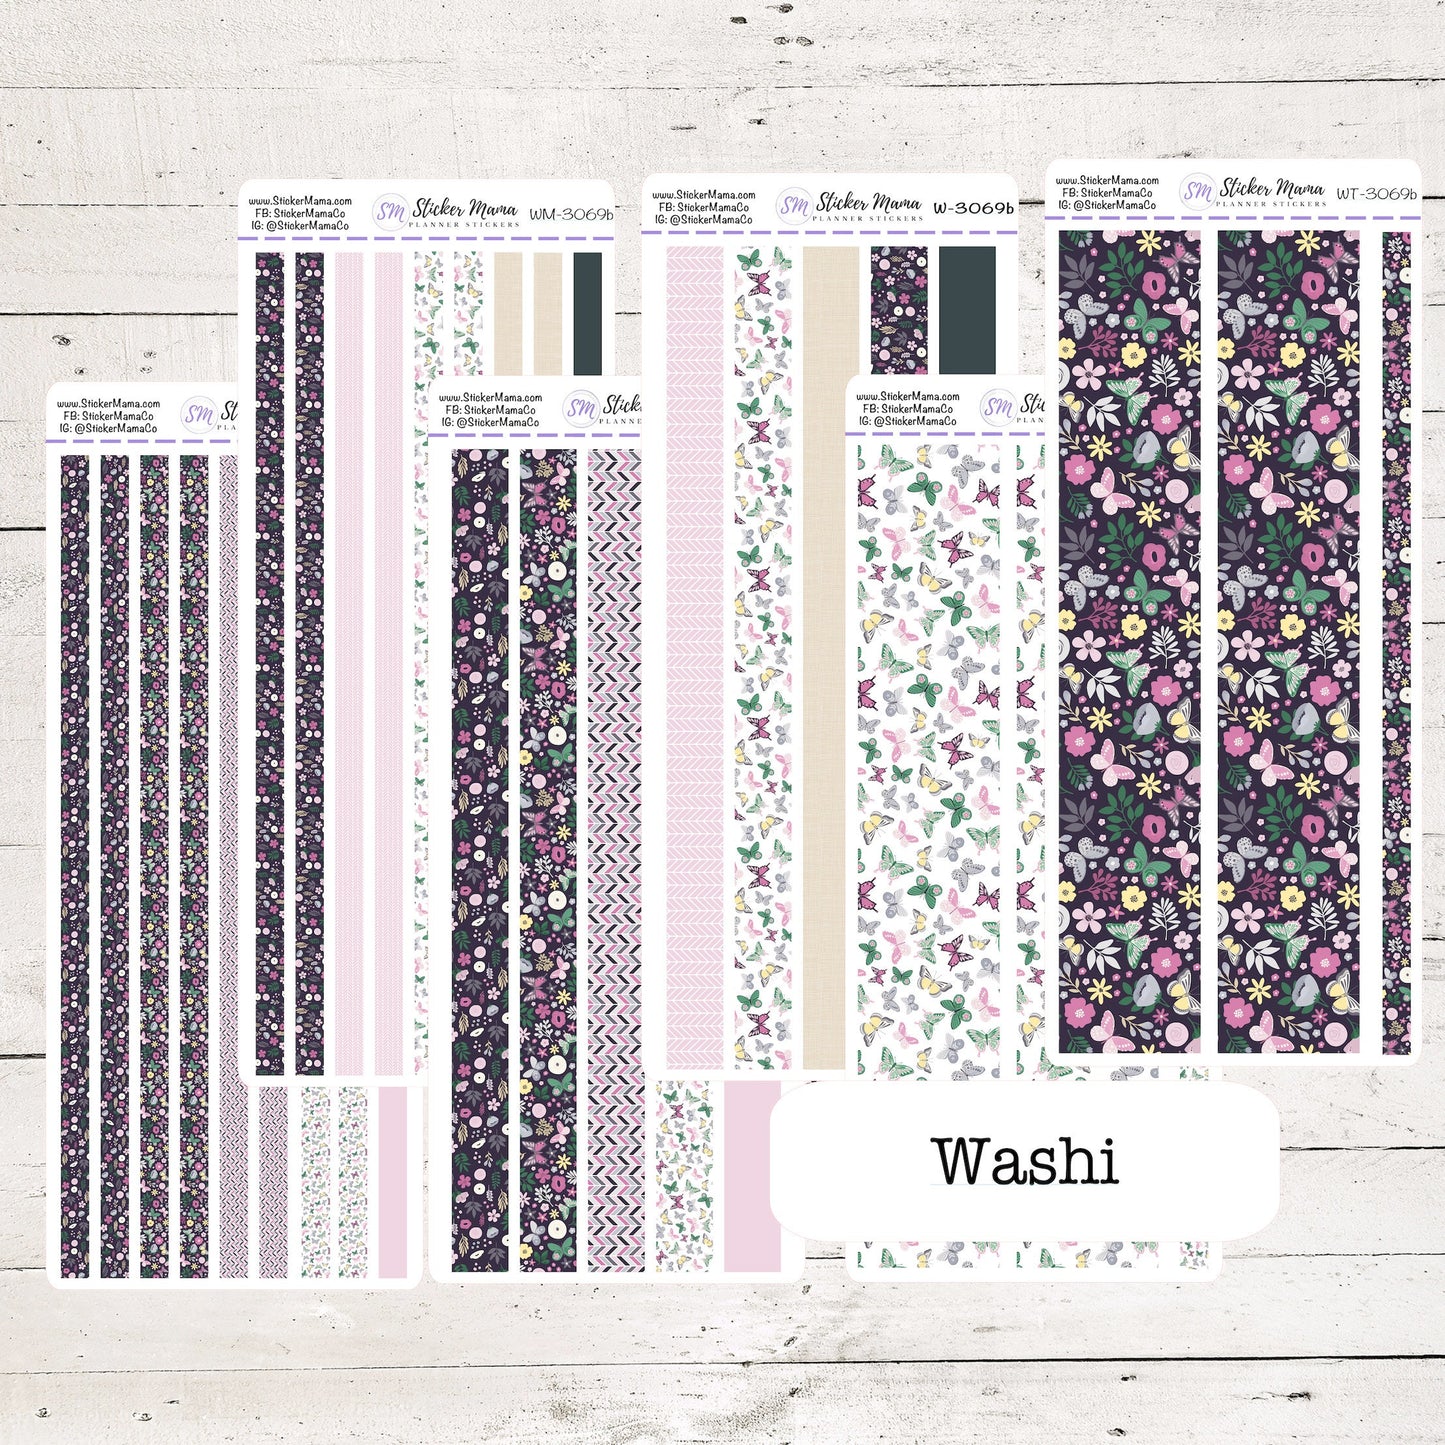 W-3069 - WASHI STICKERS - Butterflies - Planner Stickers - Washi for Planners